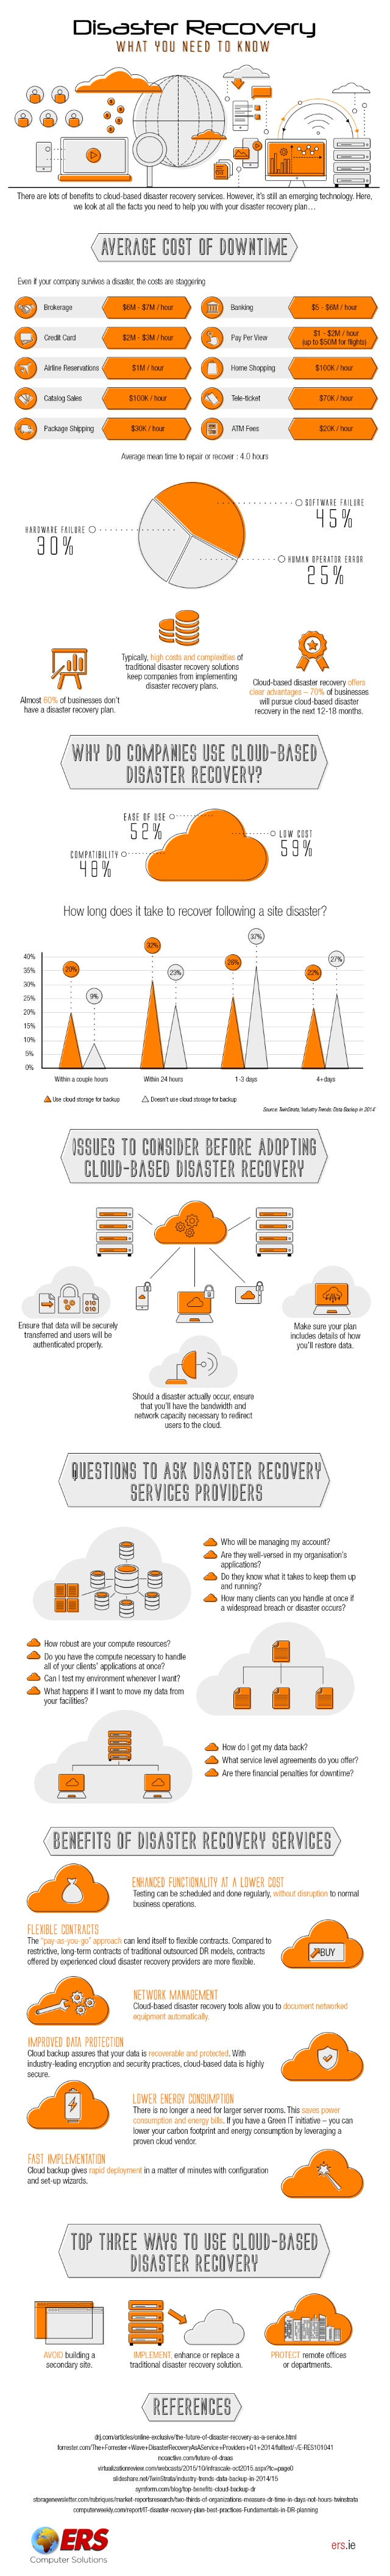 Disaster-Recovery-What-You-Need-To-Know.jpg